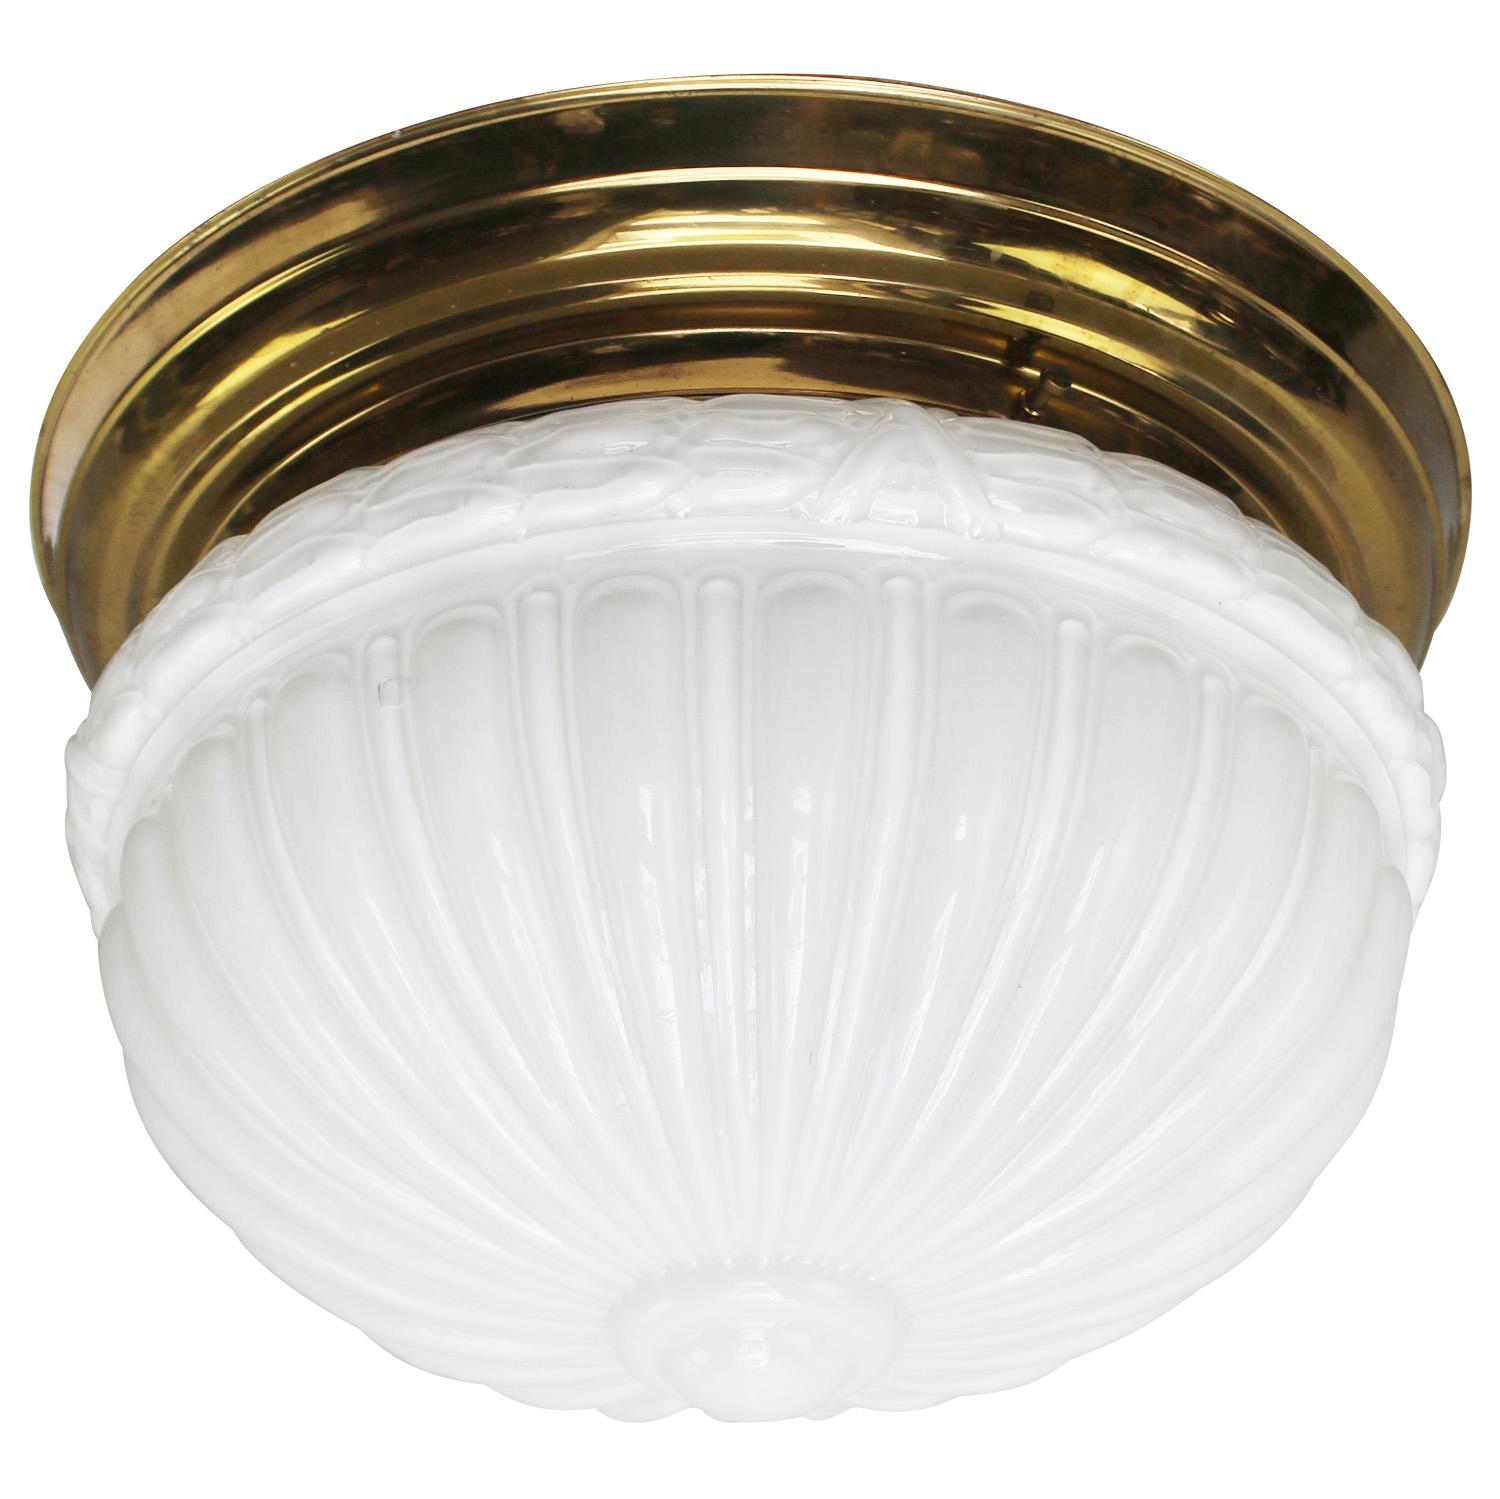 White Opaline Scone, Flush Mount, Ceiling Lamp.
Brass base with opaline glass.

Weight: 2.90 kg / 6.4 lb

Priced per individual item. All lamps have been made suitable by international standards for incandescent light bulbs, energy-efficient and LED